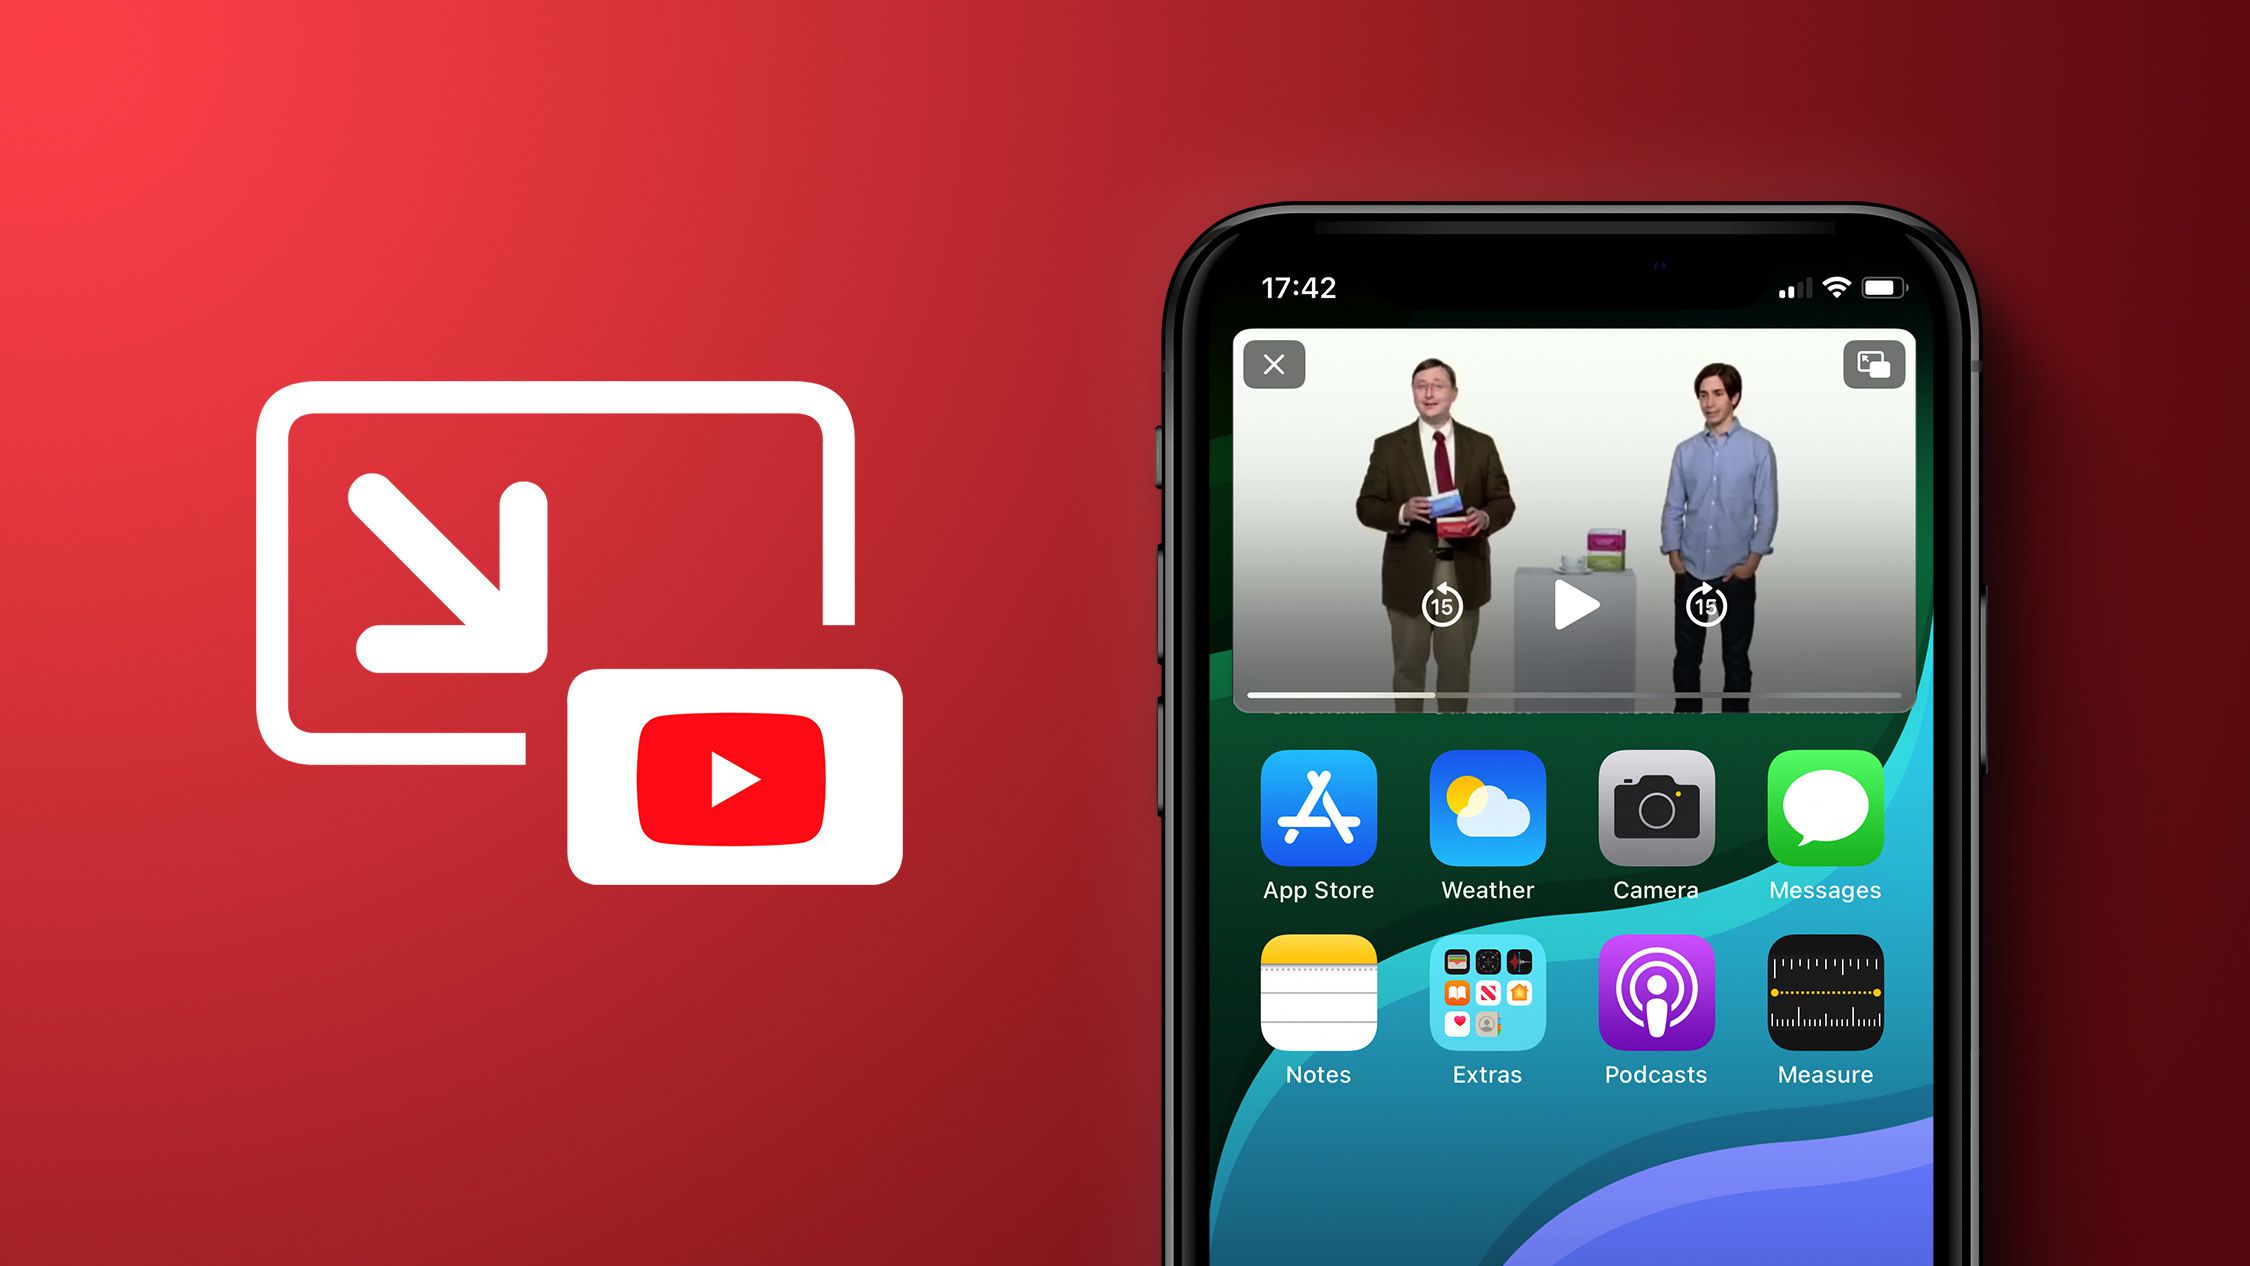 YouTube Premium Subscribers Can Now Use iOS Picture-in-Picture: Here's How